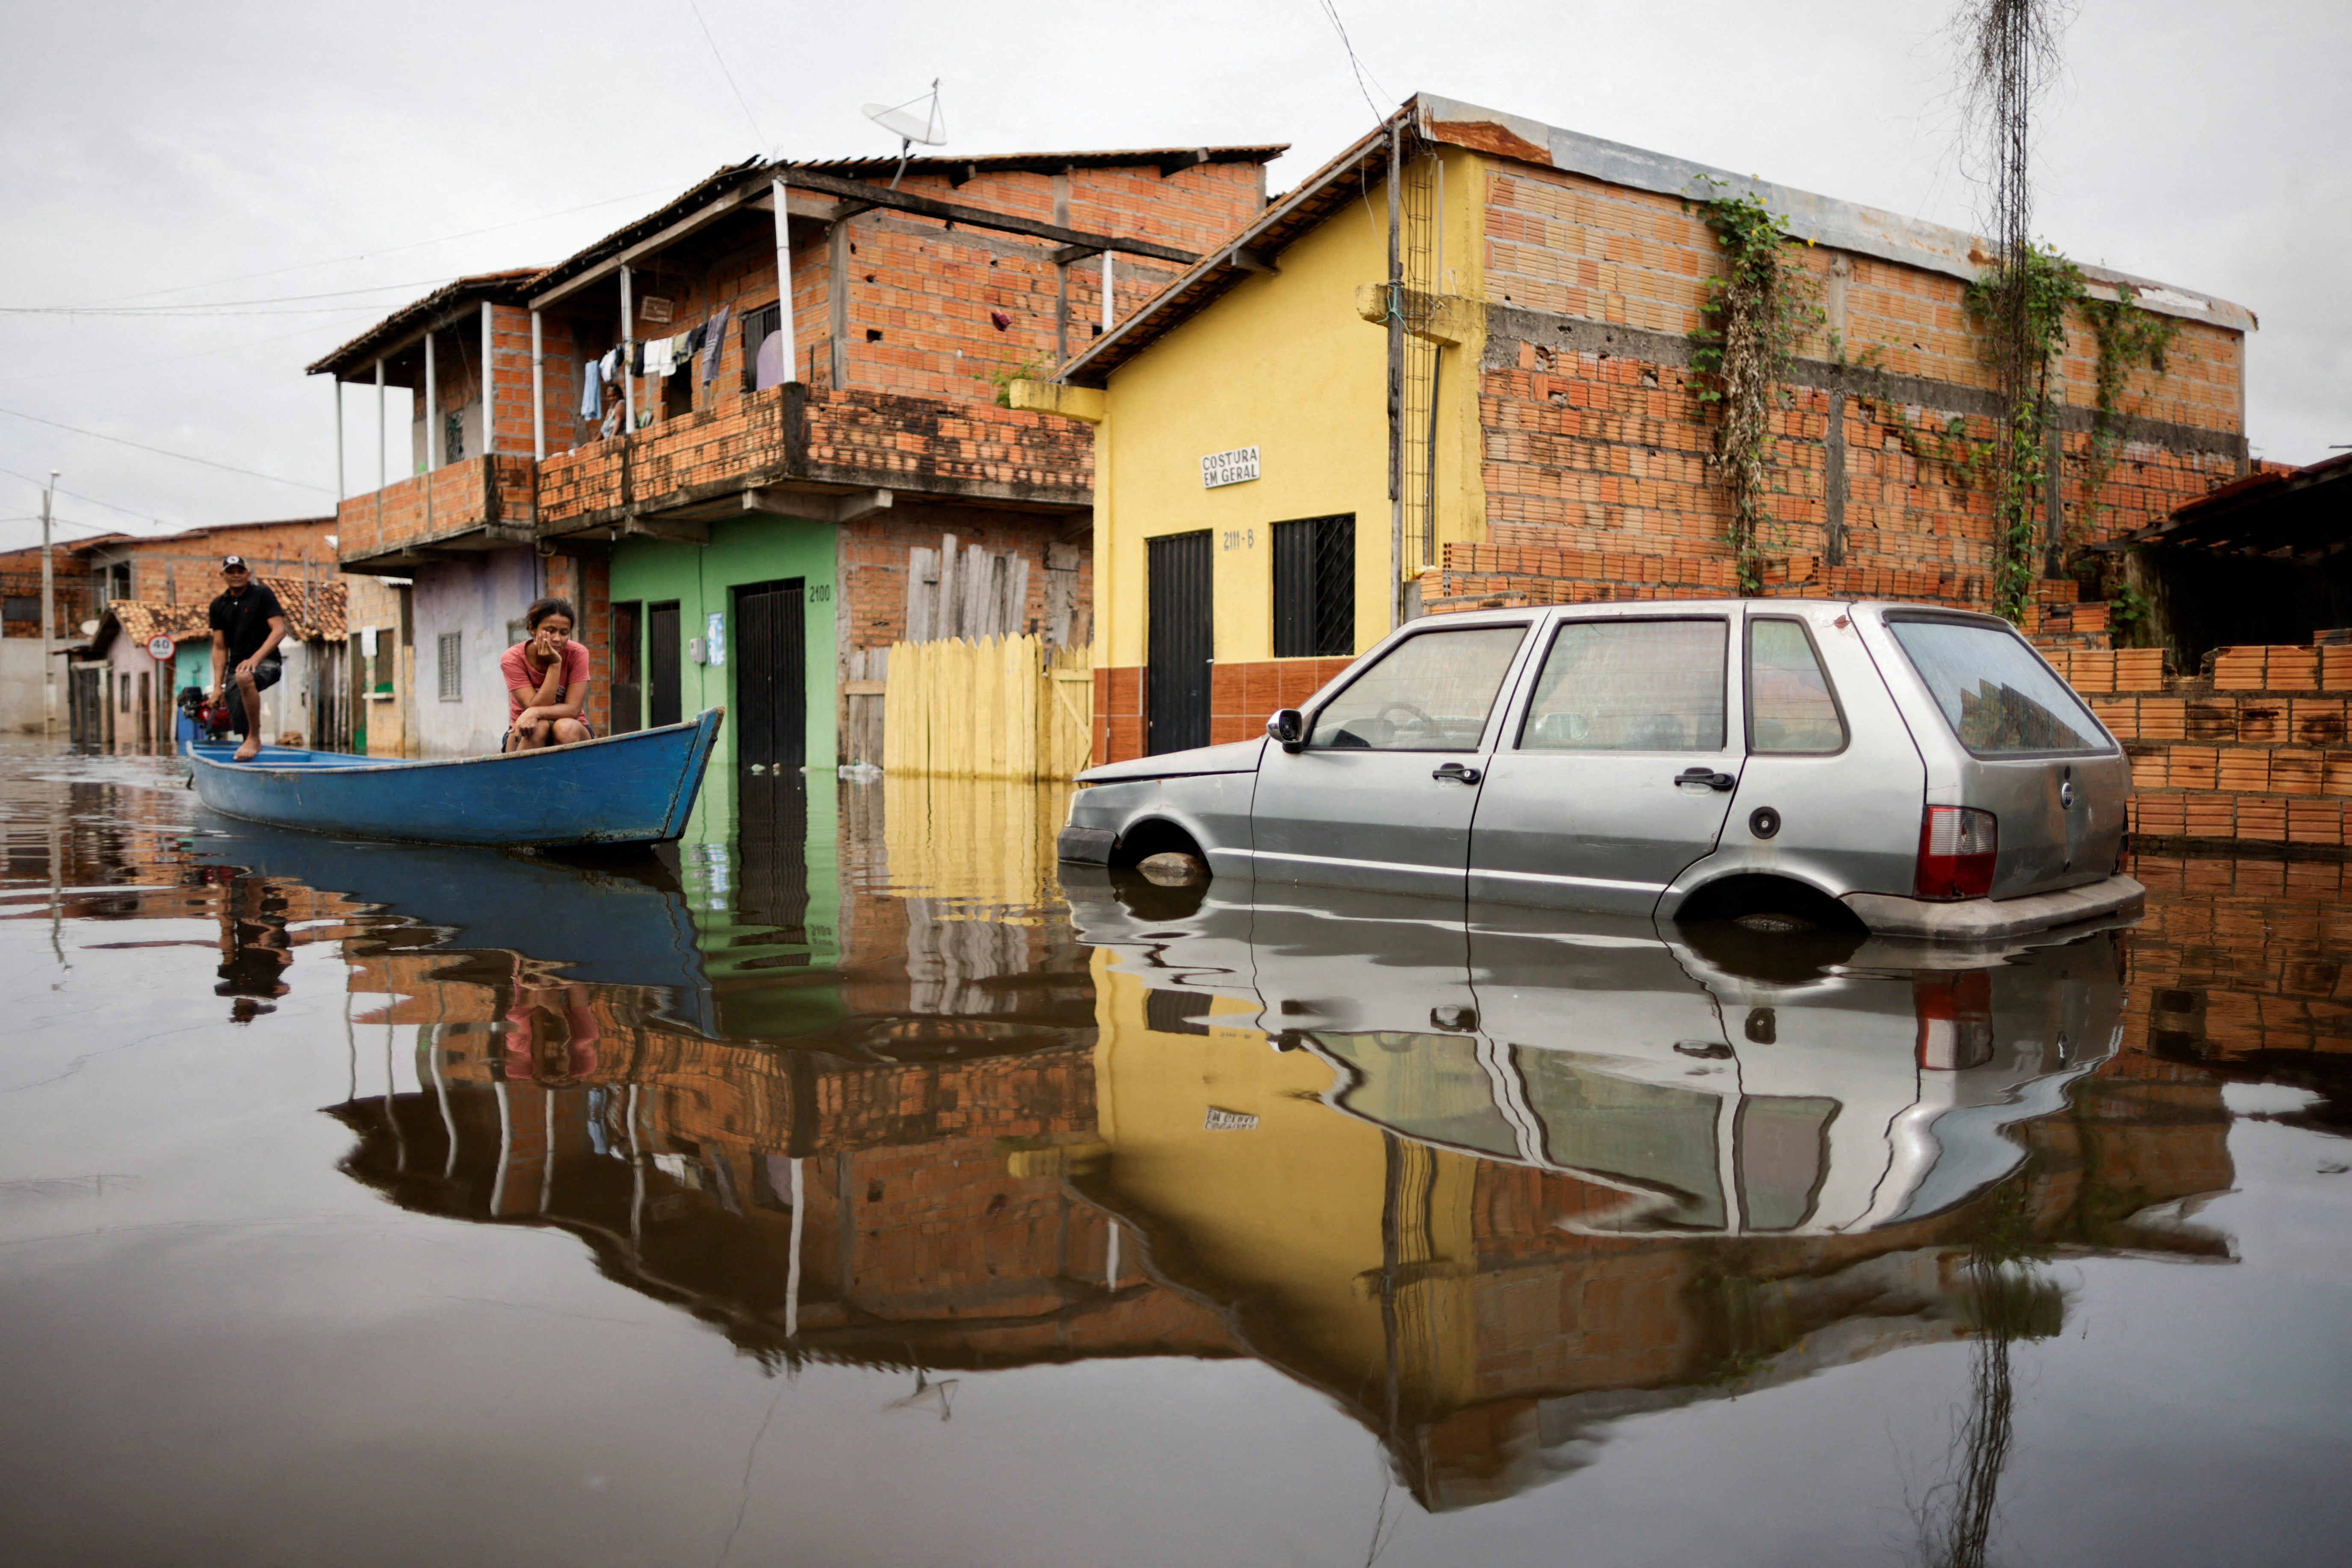 People in a canoe cross a car on a flooded street during floods caused by heavy rain in Maraba, Para state, Brazil January 9, 2022. REUTERS/Ueslei Marcelino